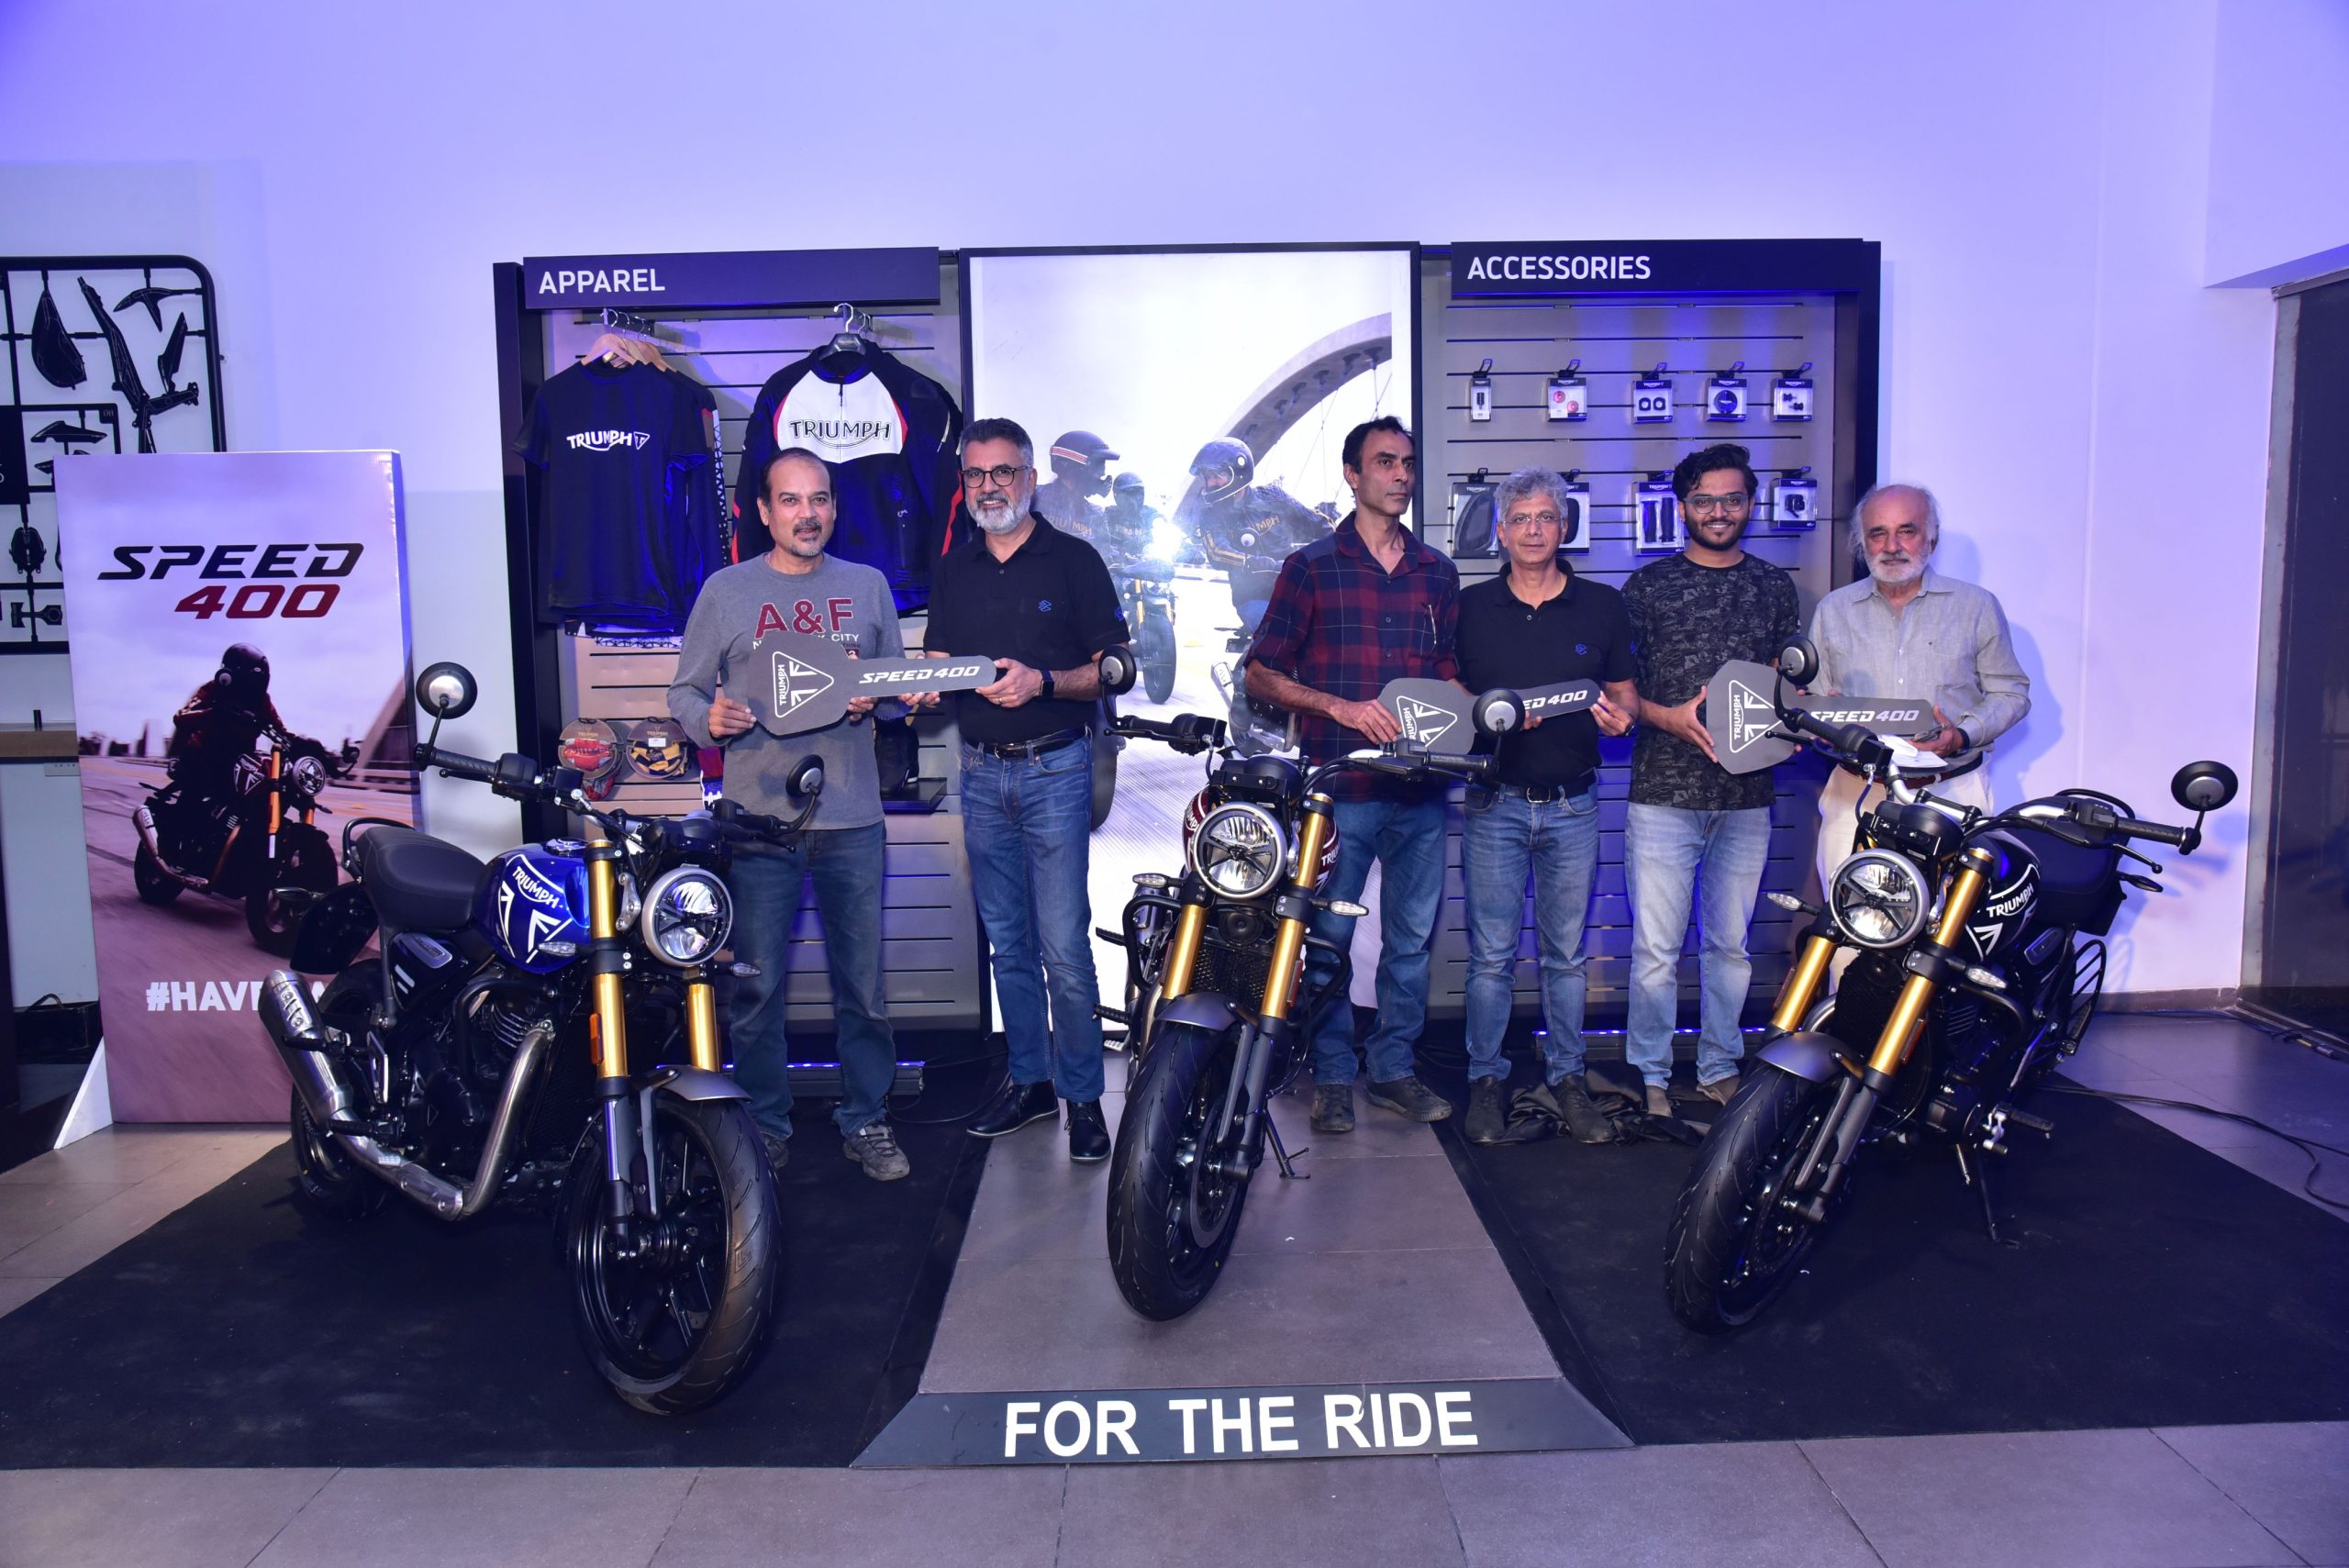 First Batch of Triumph Speed 400 Bikes Delivered in Pune